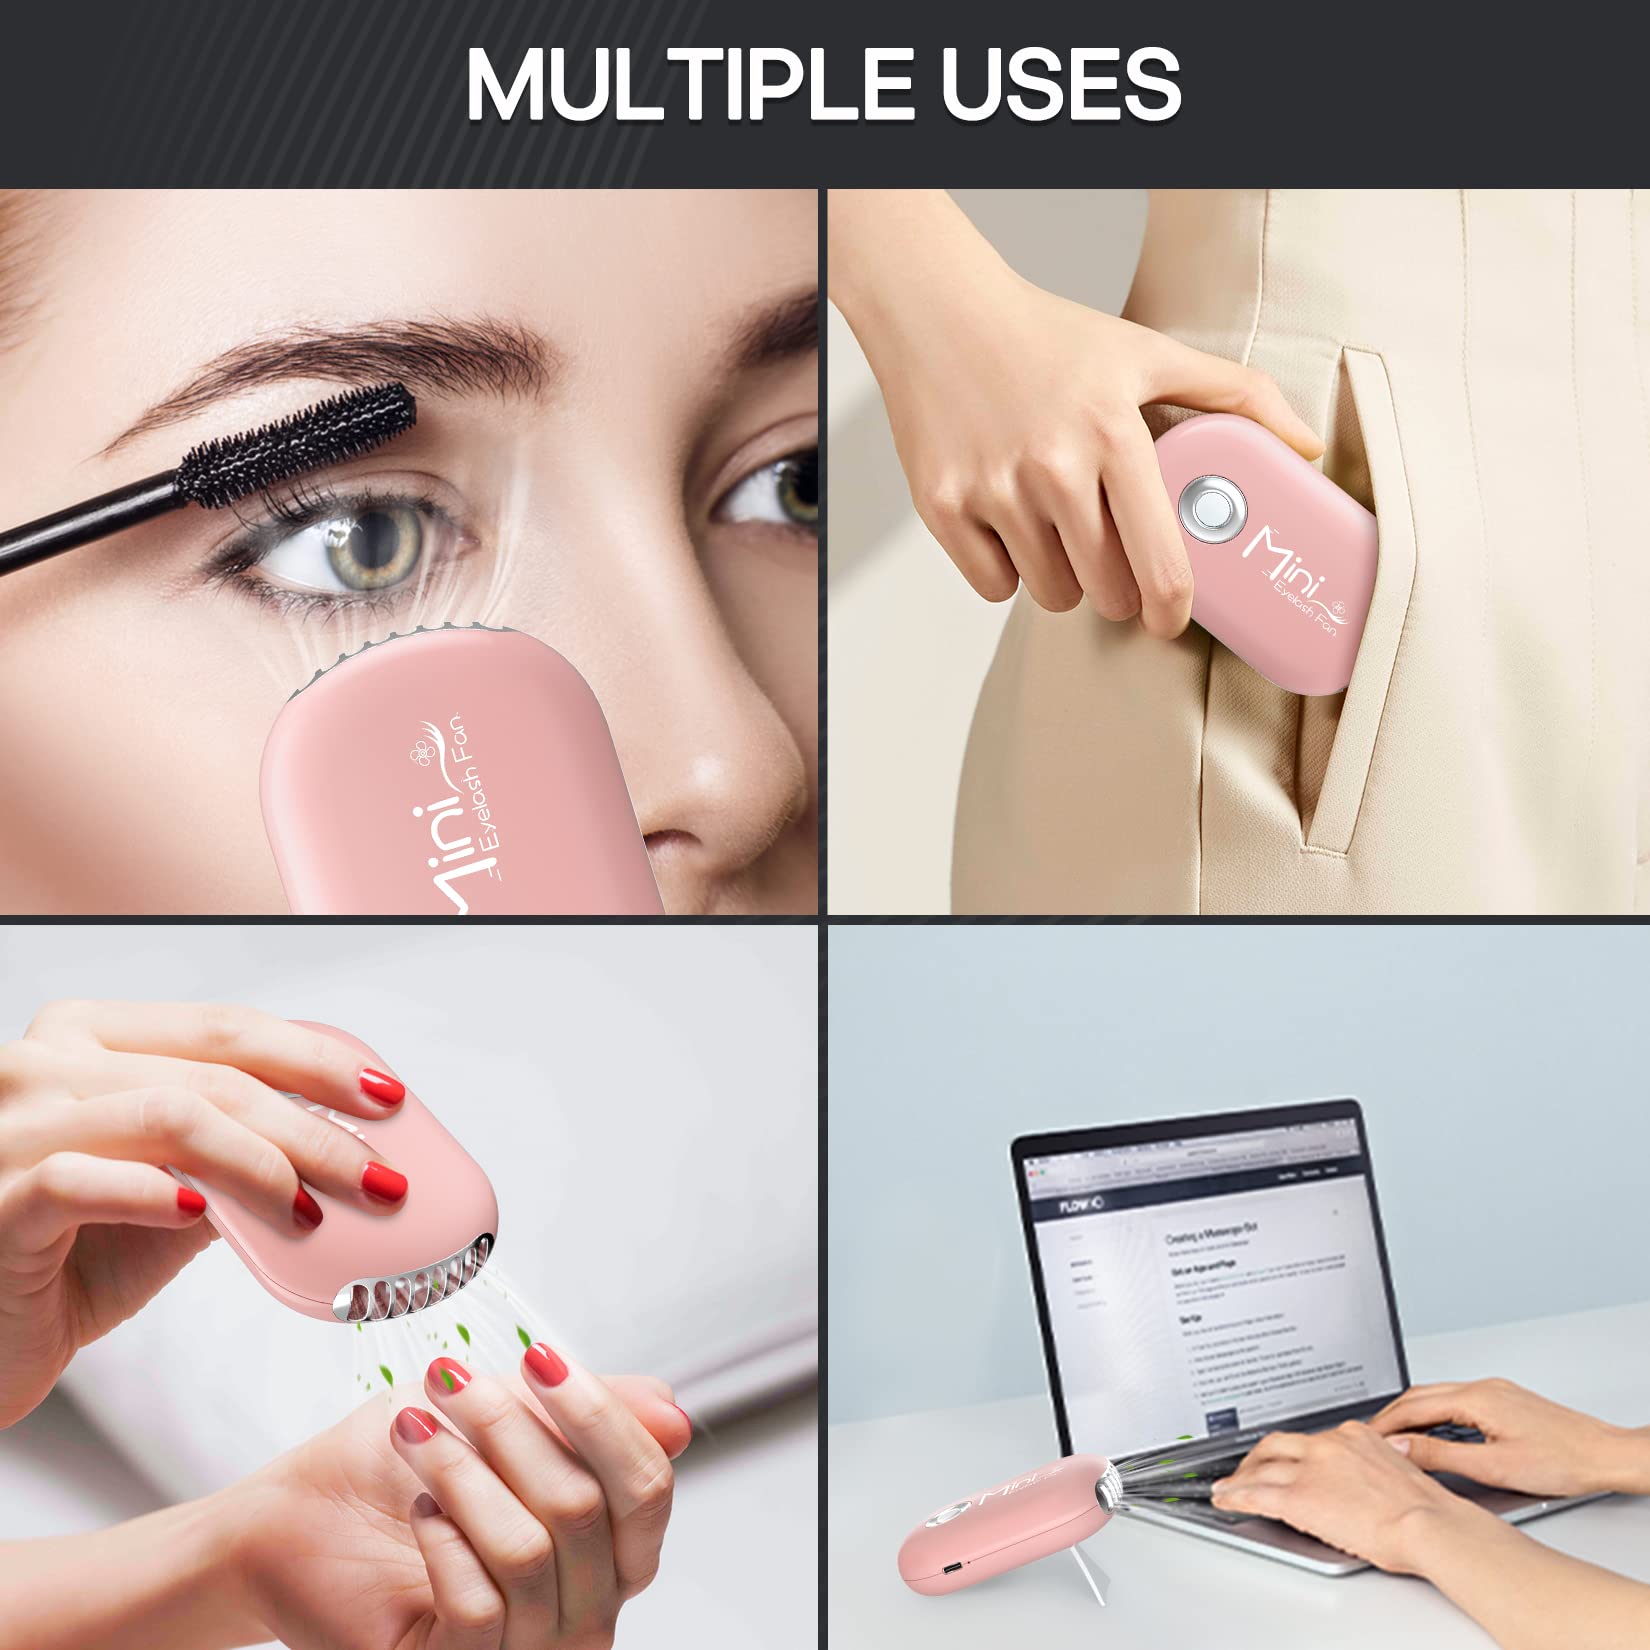 Buqikma USB Mini Lash Fan with Built in Sponge for Eyelash Extension Handheld Air Conditioning Rechargable Type C (Pink)